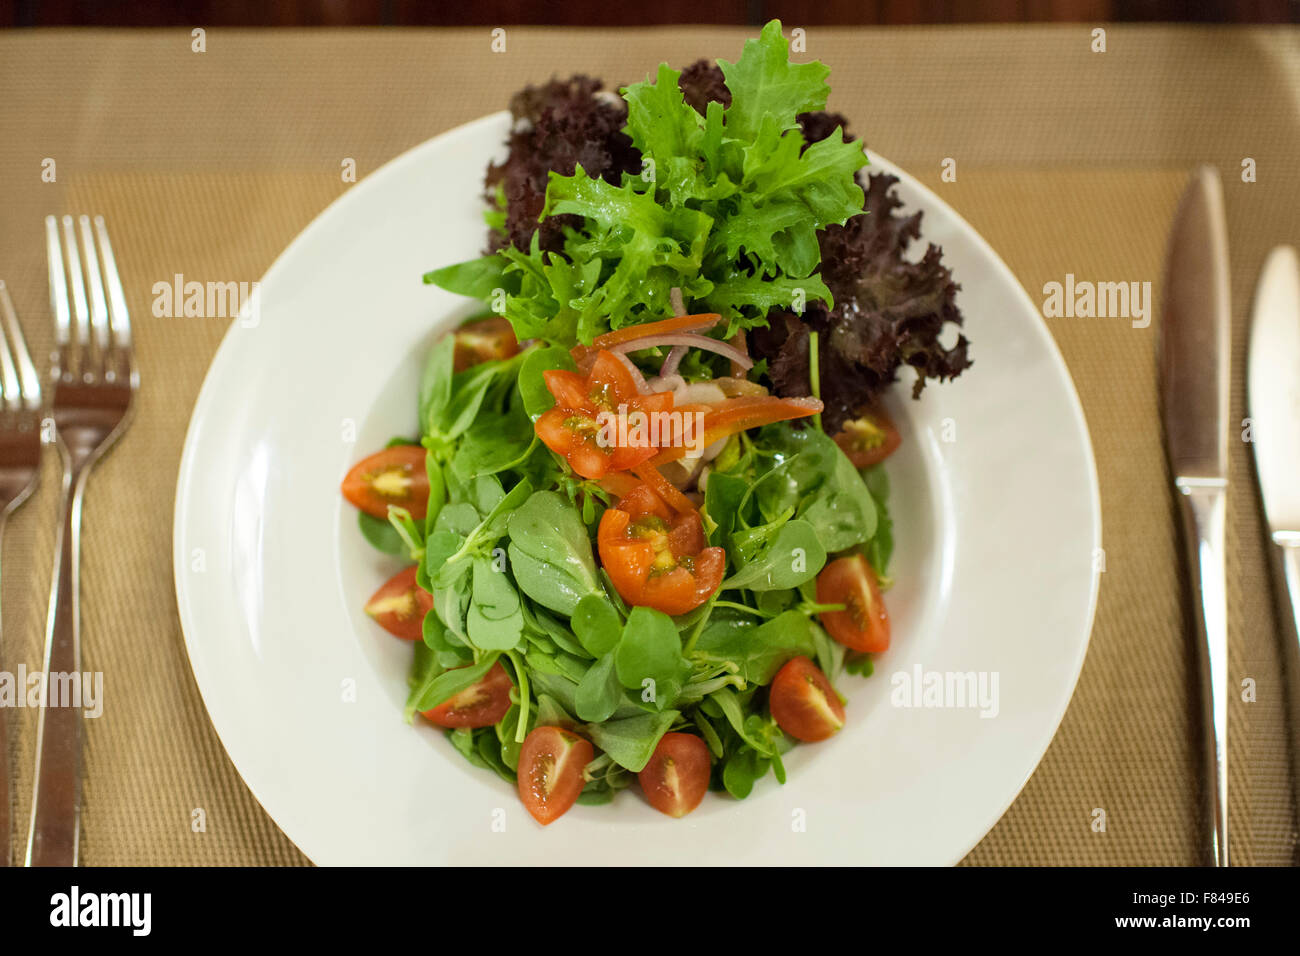 Gheleambe, a traditional salad from the desert region of Oman. Stock Photo